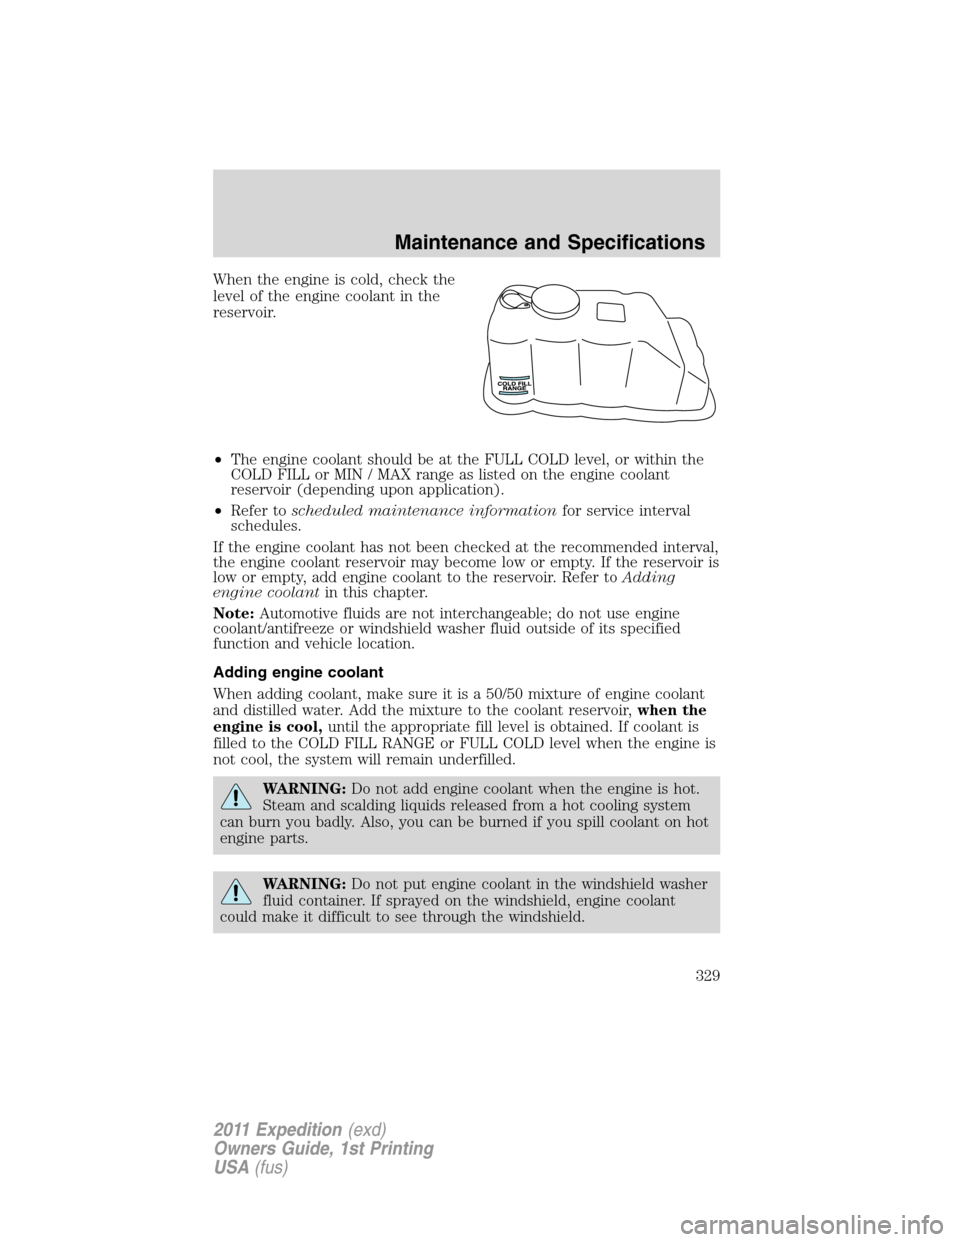 FORD EXPEDITION 2011 3.G Owners Manual When the engine is cold, check the
level of the engine coolant in the
reservoir.
•The engine coolant should be at the FULL COLD level, or within the
COLD FILL or MIN / MAX range as listed on the eng